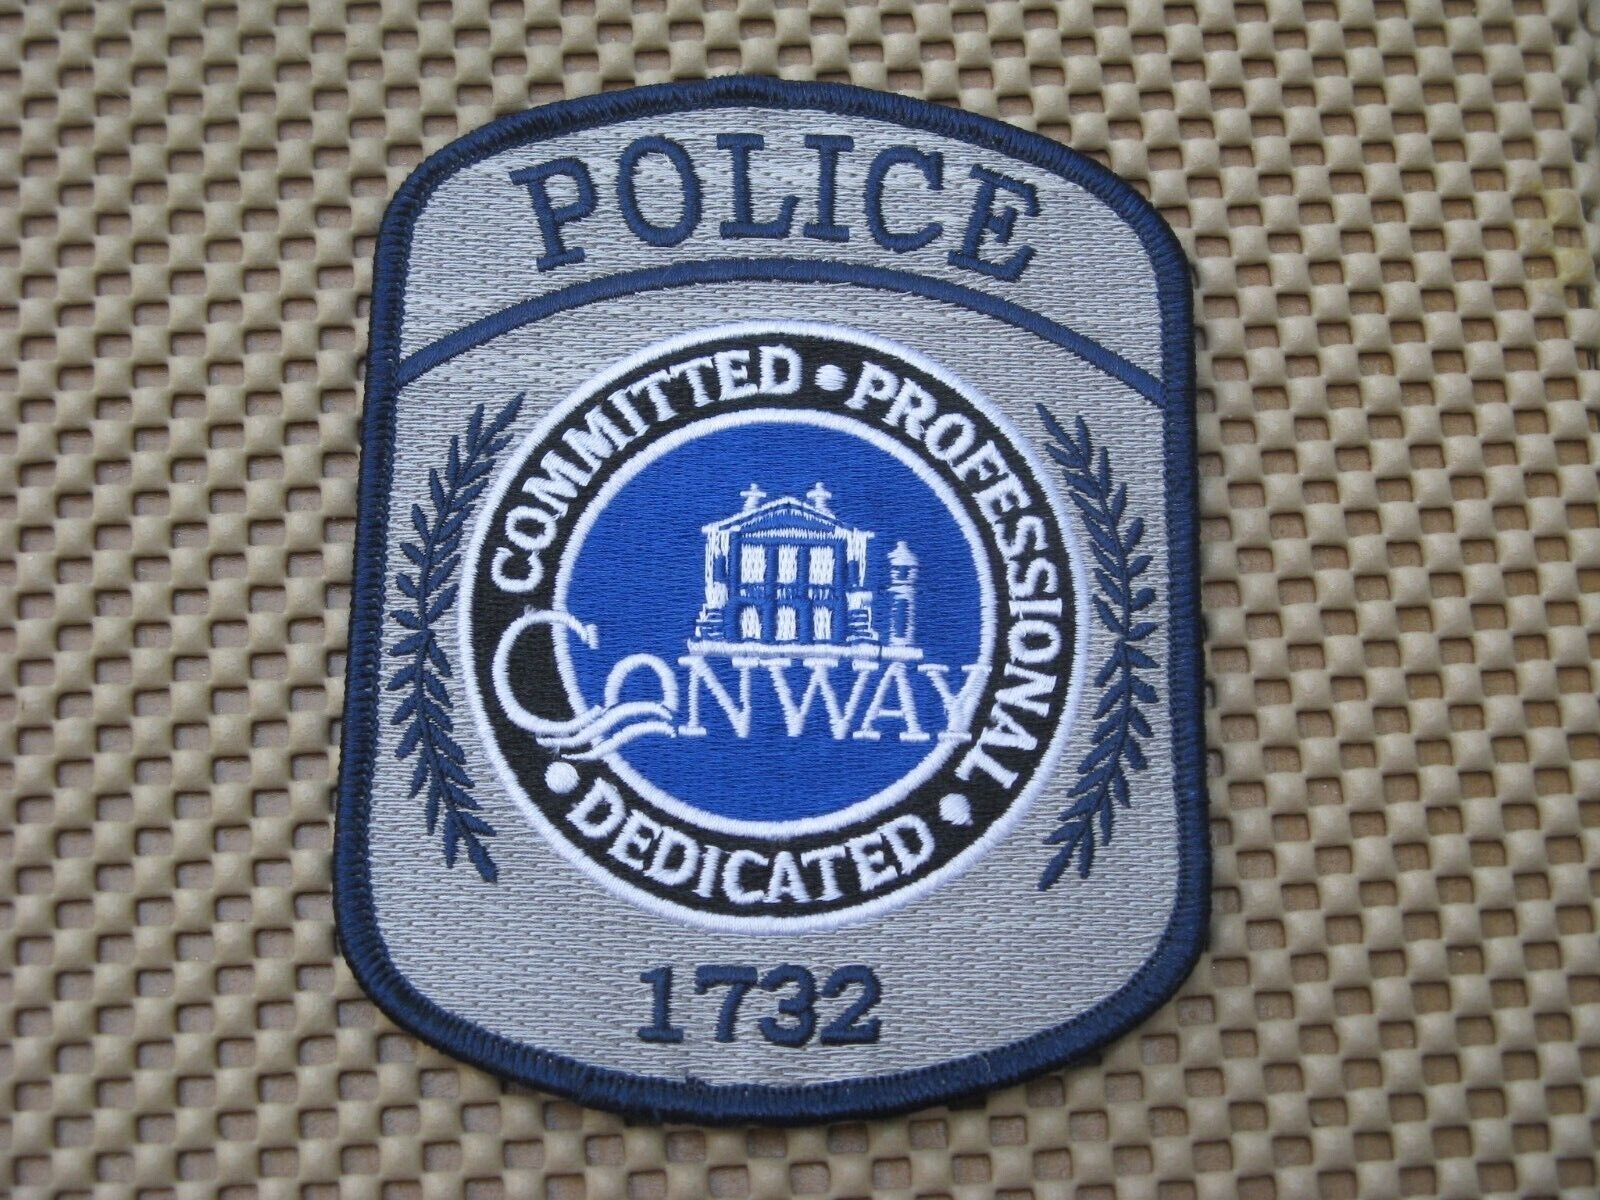 SC. CONWAY SOUTH CAROLINA  (Committed Professional Dedicated)  POLICE PATCH